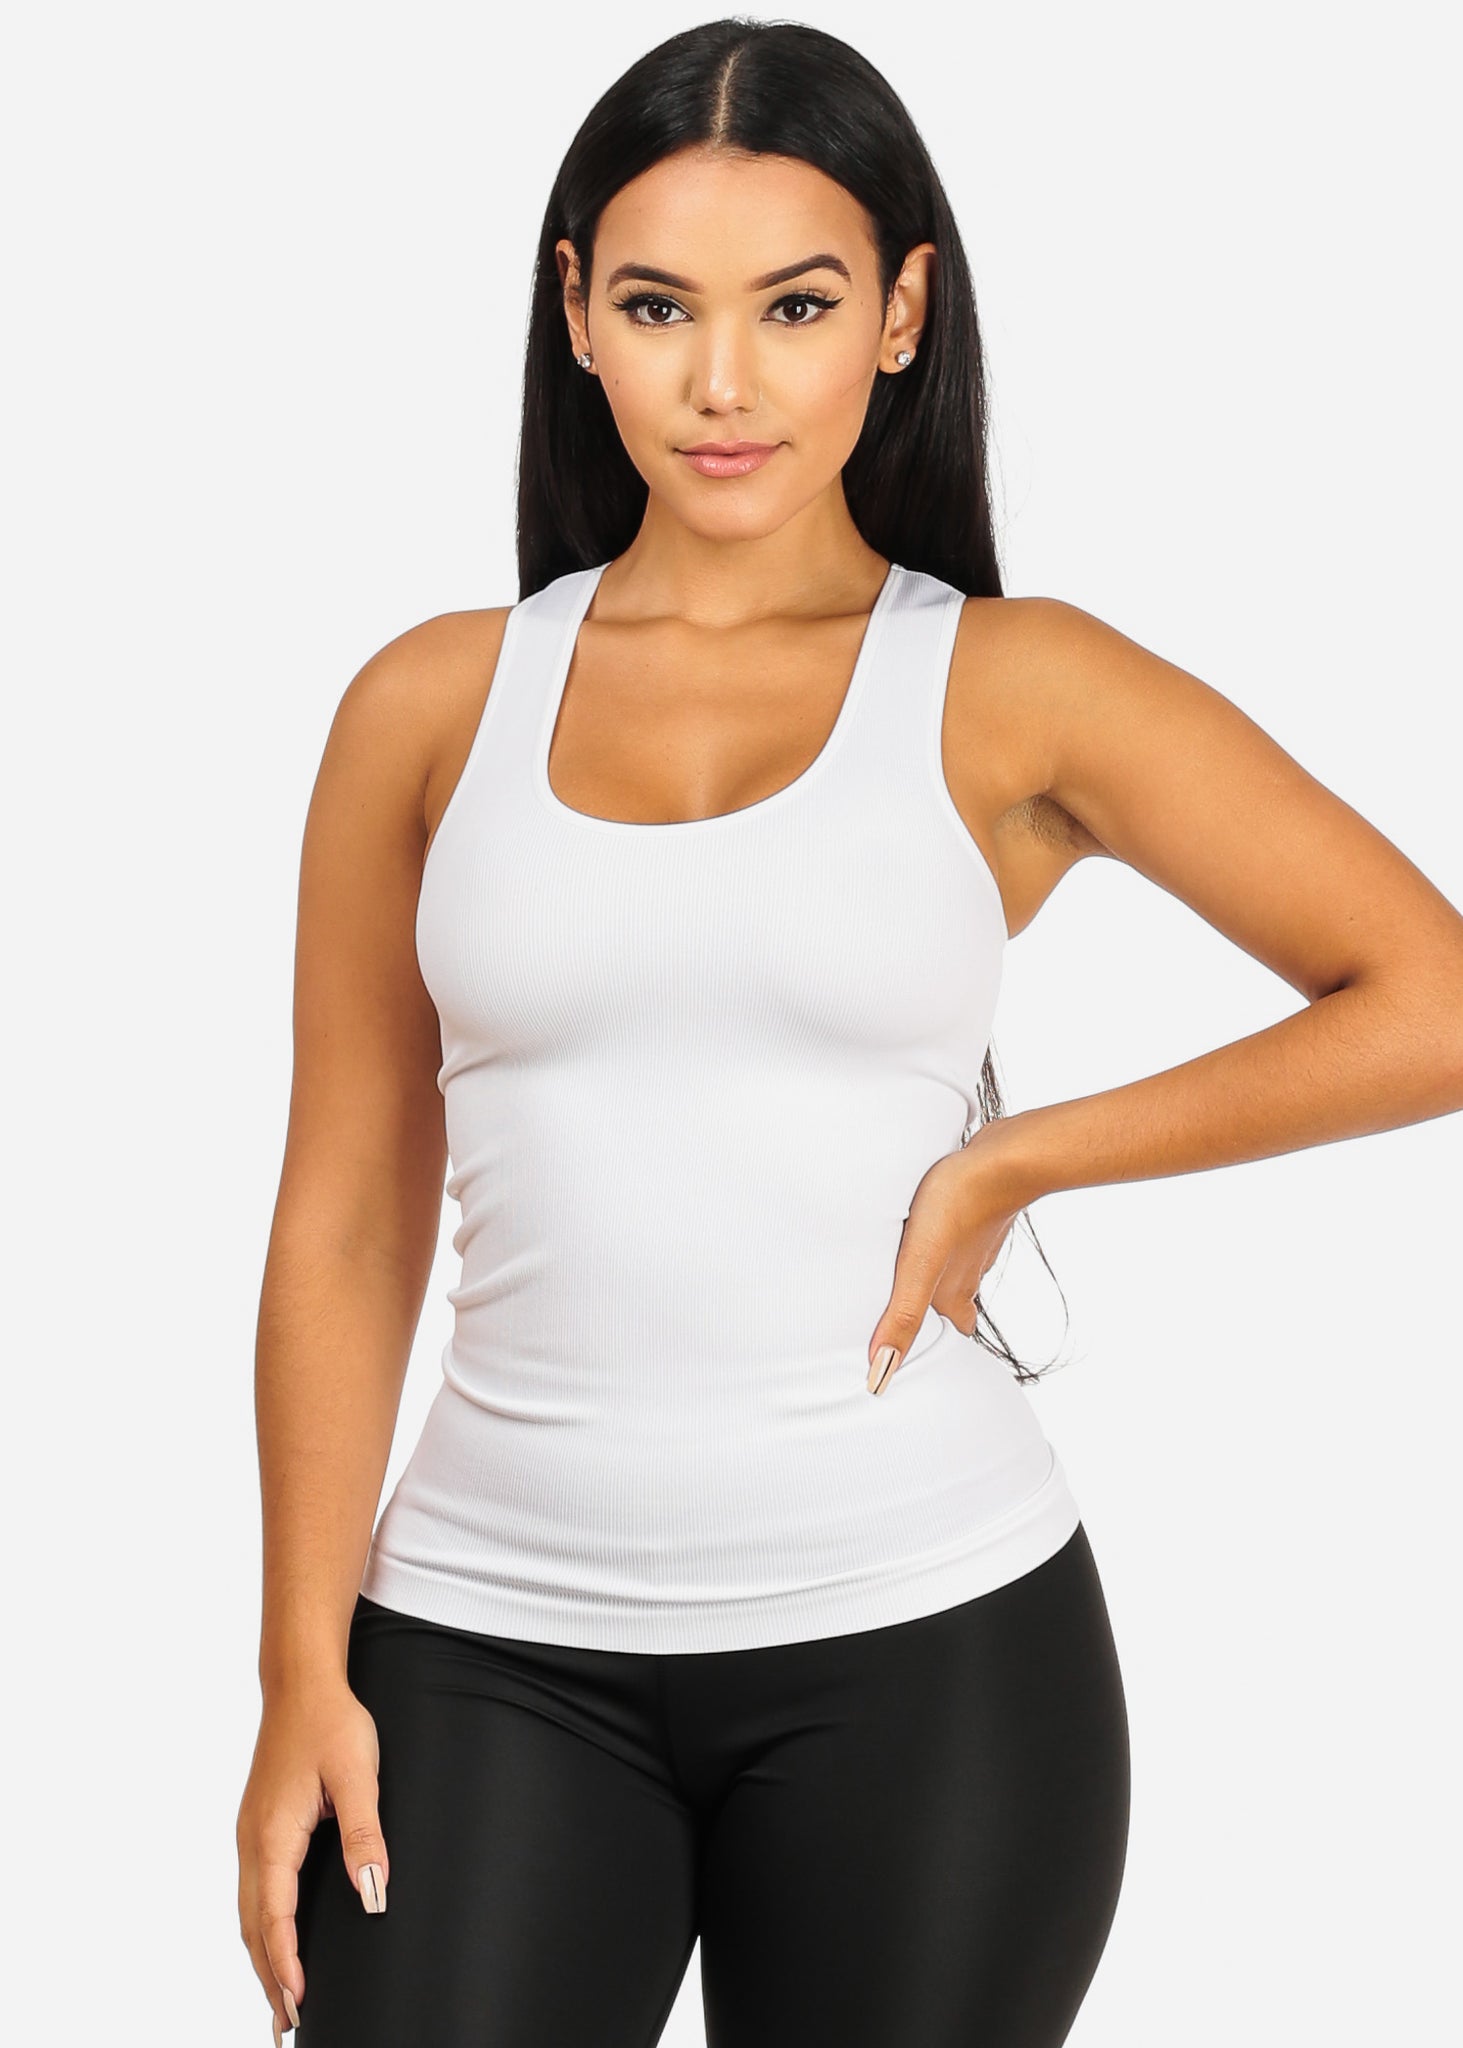 free size means one size' Women's Premium Tank Top